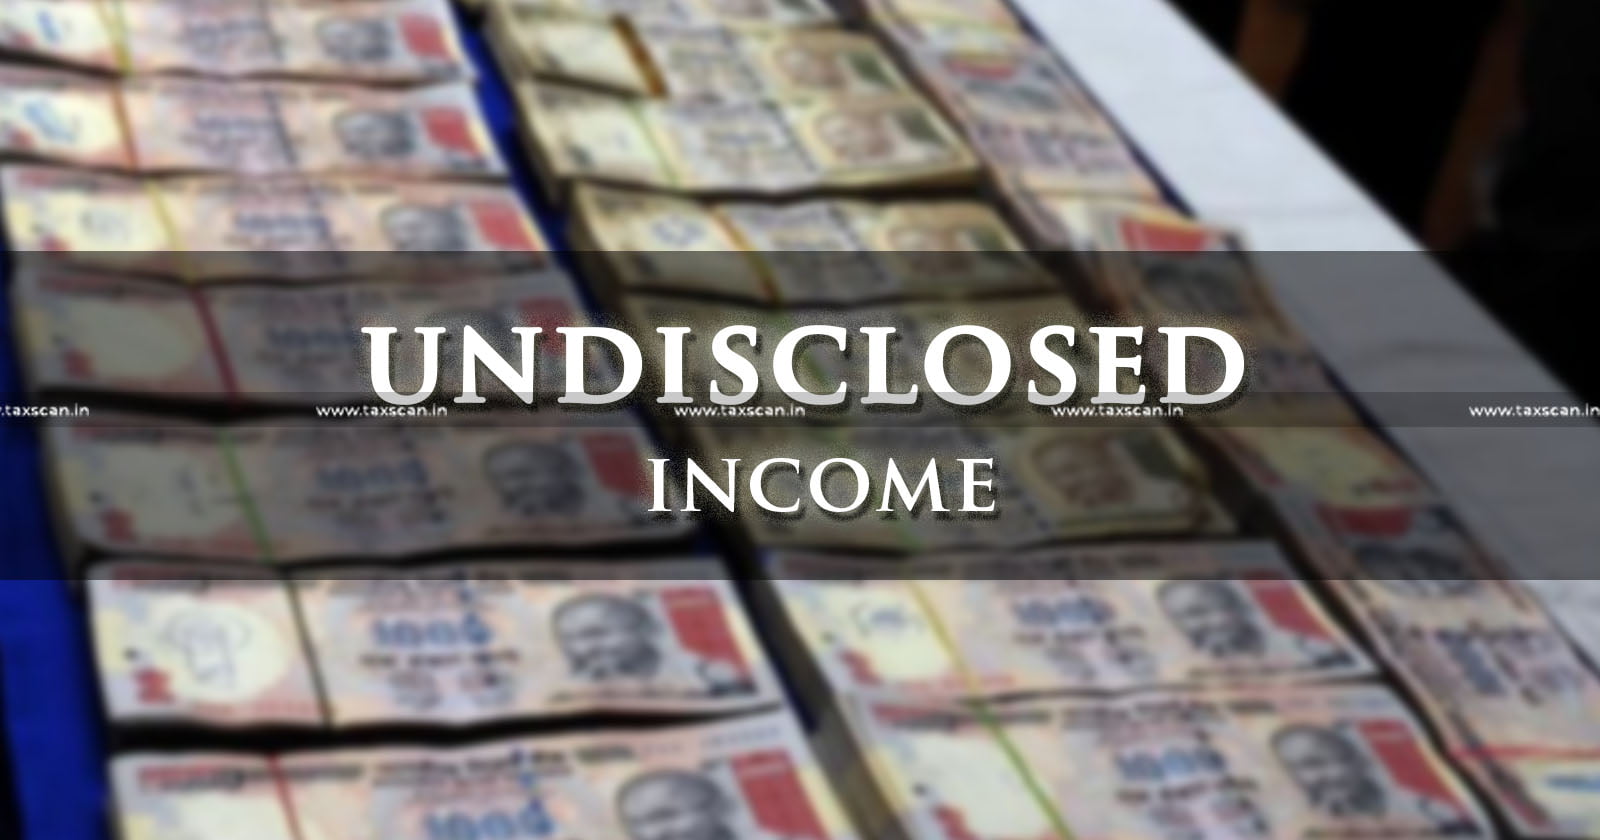 ITAT deletes Income Tax Act Due to Lack of - Opportunity to Explain Undisclosed Income Source During Search Proceedings - TAXSCAN